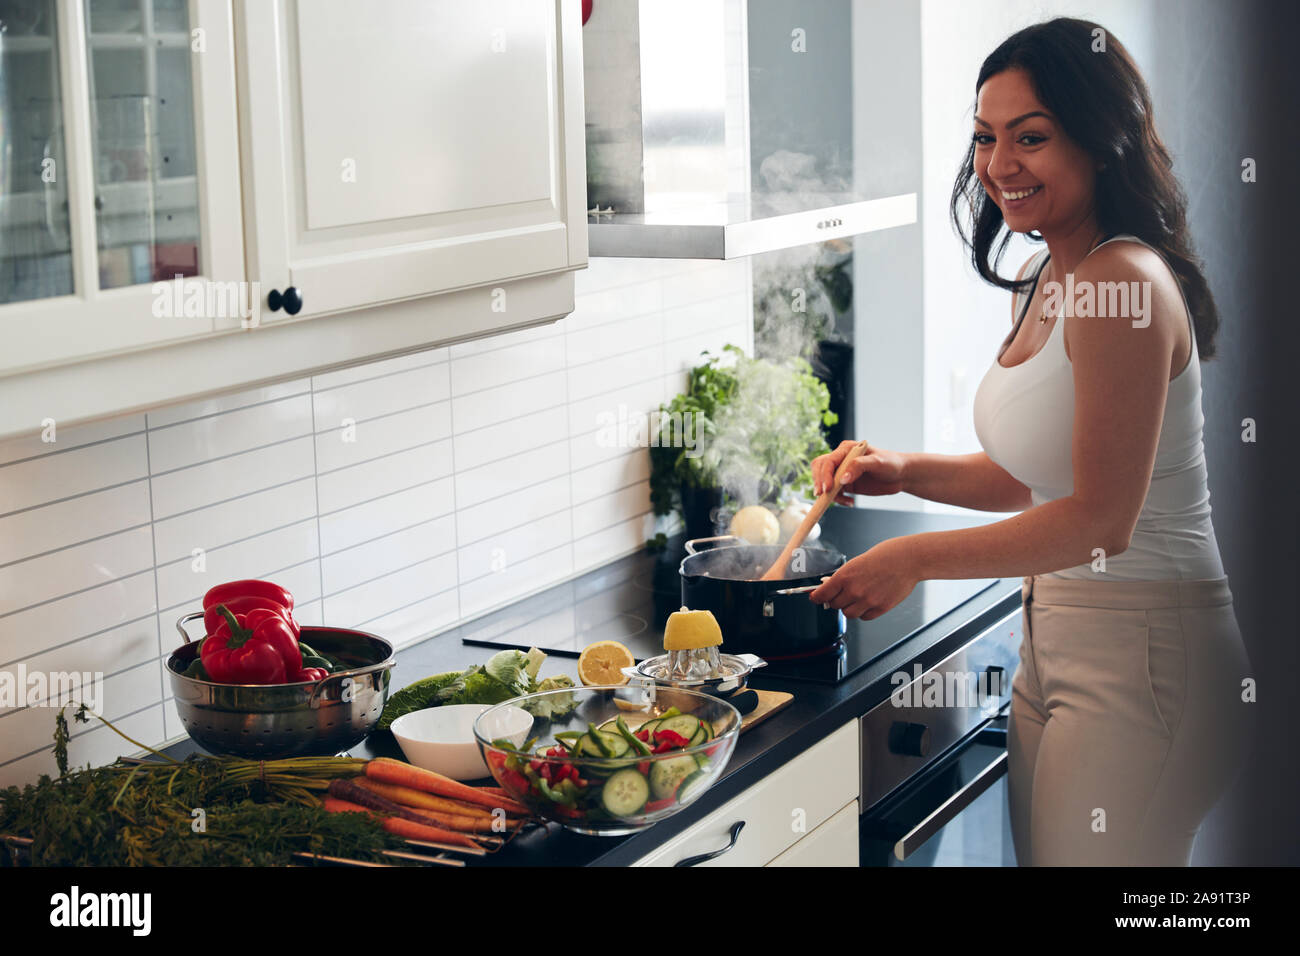 Woman preparing healthy food in kitchen Stock Photo